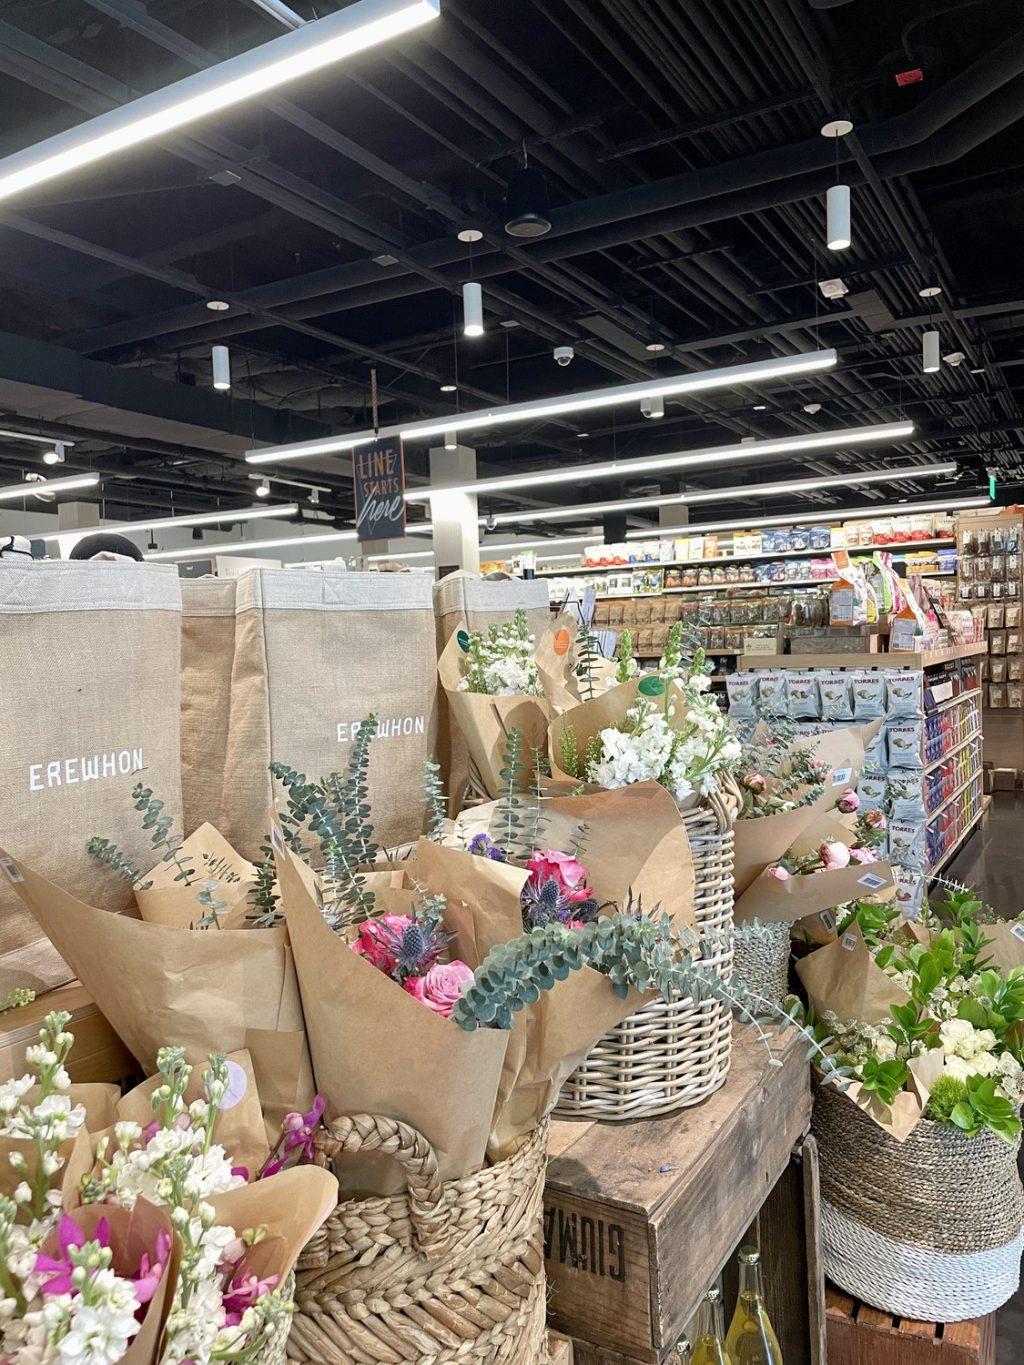 The Erewhon brand extends between food in offering customers branded merch such as tote bags, flowers and home essentials displayed near the registers. The company has also provided customers with wellness and lifestyle content through its online blog with posts that have included tips for mindfulness, skincare guides and helpful immune boosters.